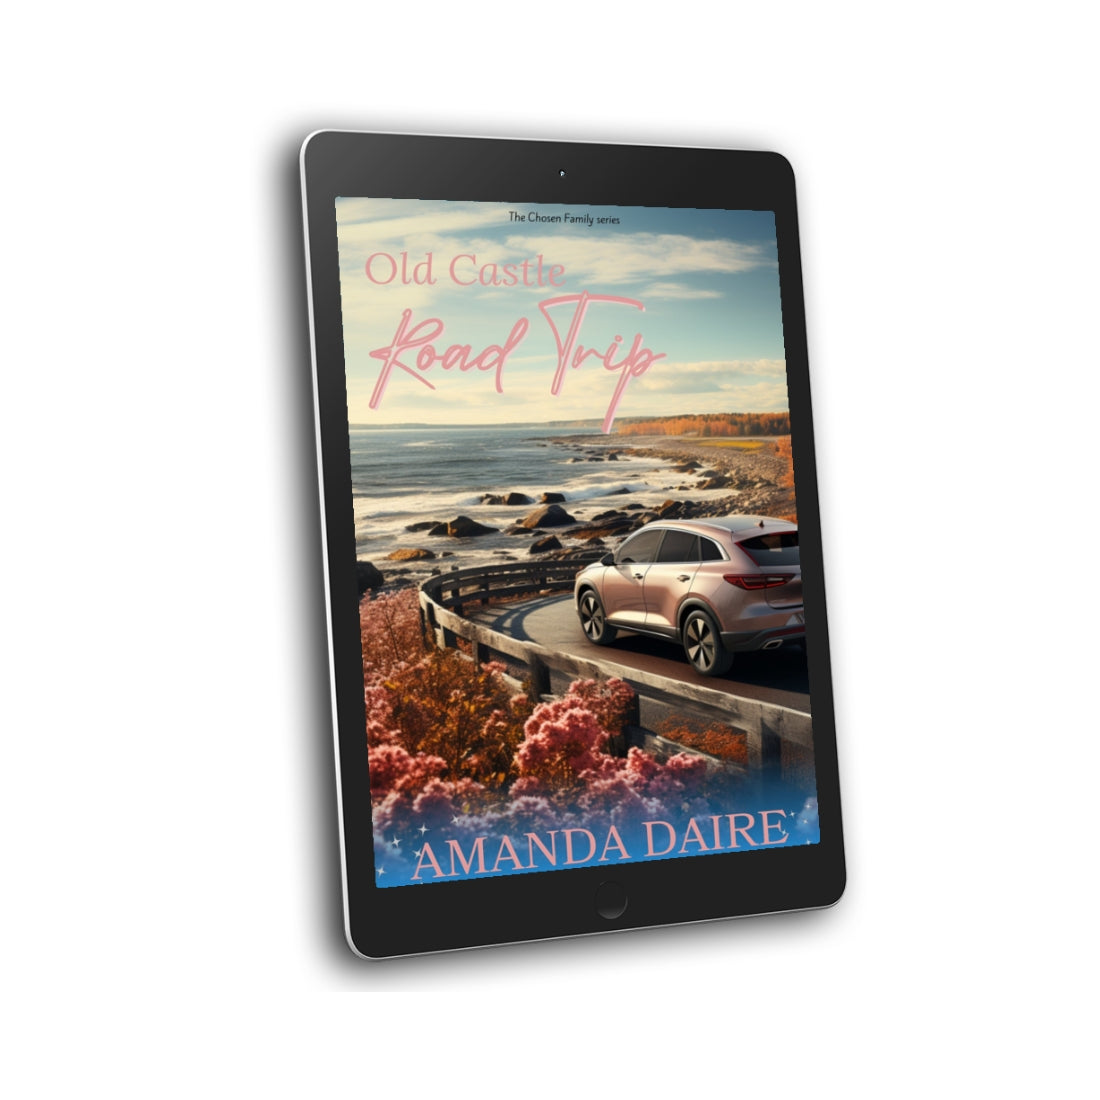 Old Castle Road Trip women's fiction/relatable relationship fiction/family drama